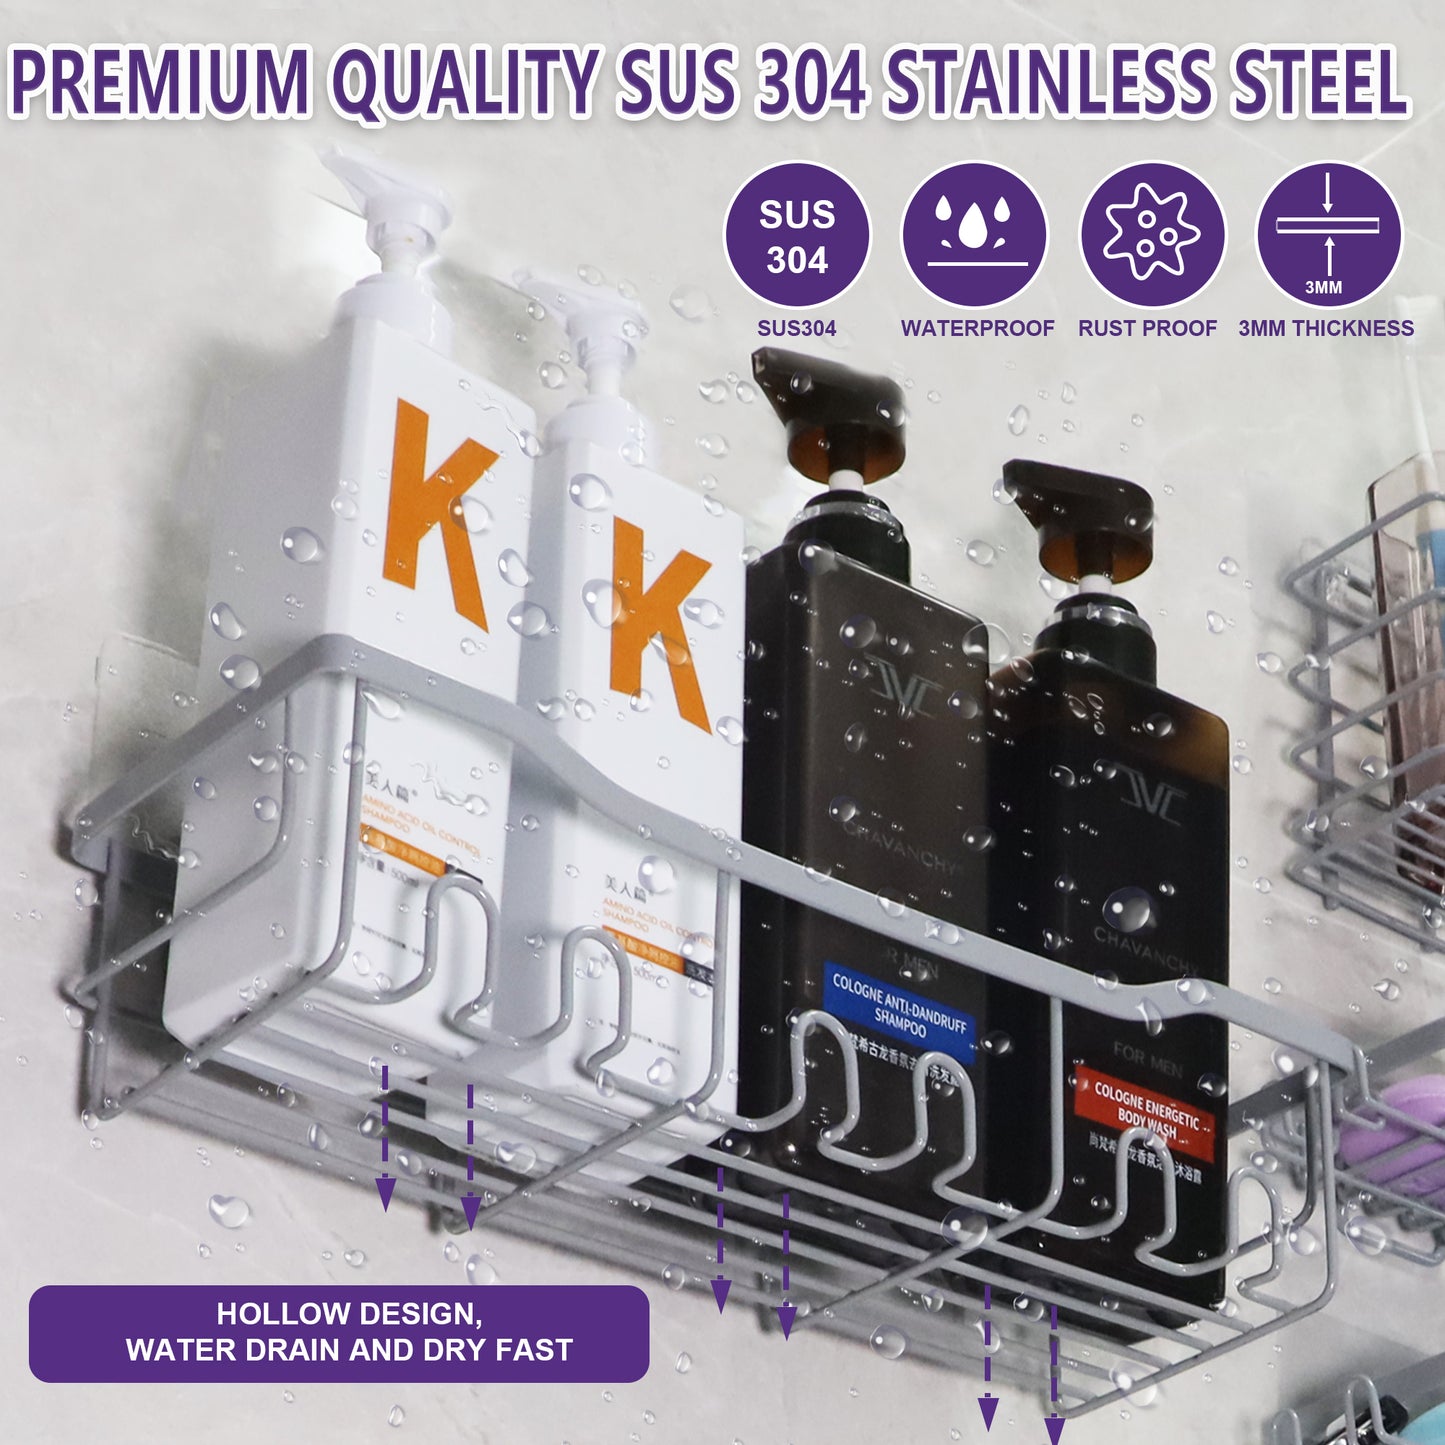 Super Strong Adhesive Stainless Steel Shower Caddy, 5 Pack; With Extra Adhesive And Magic Napkins